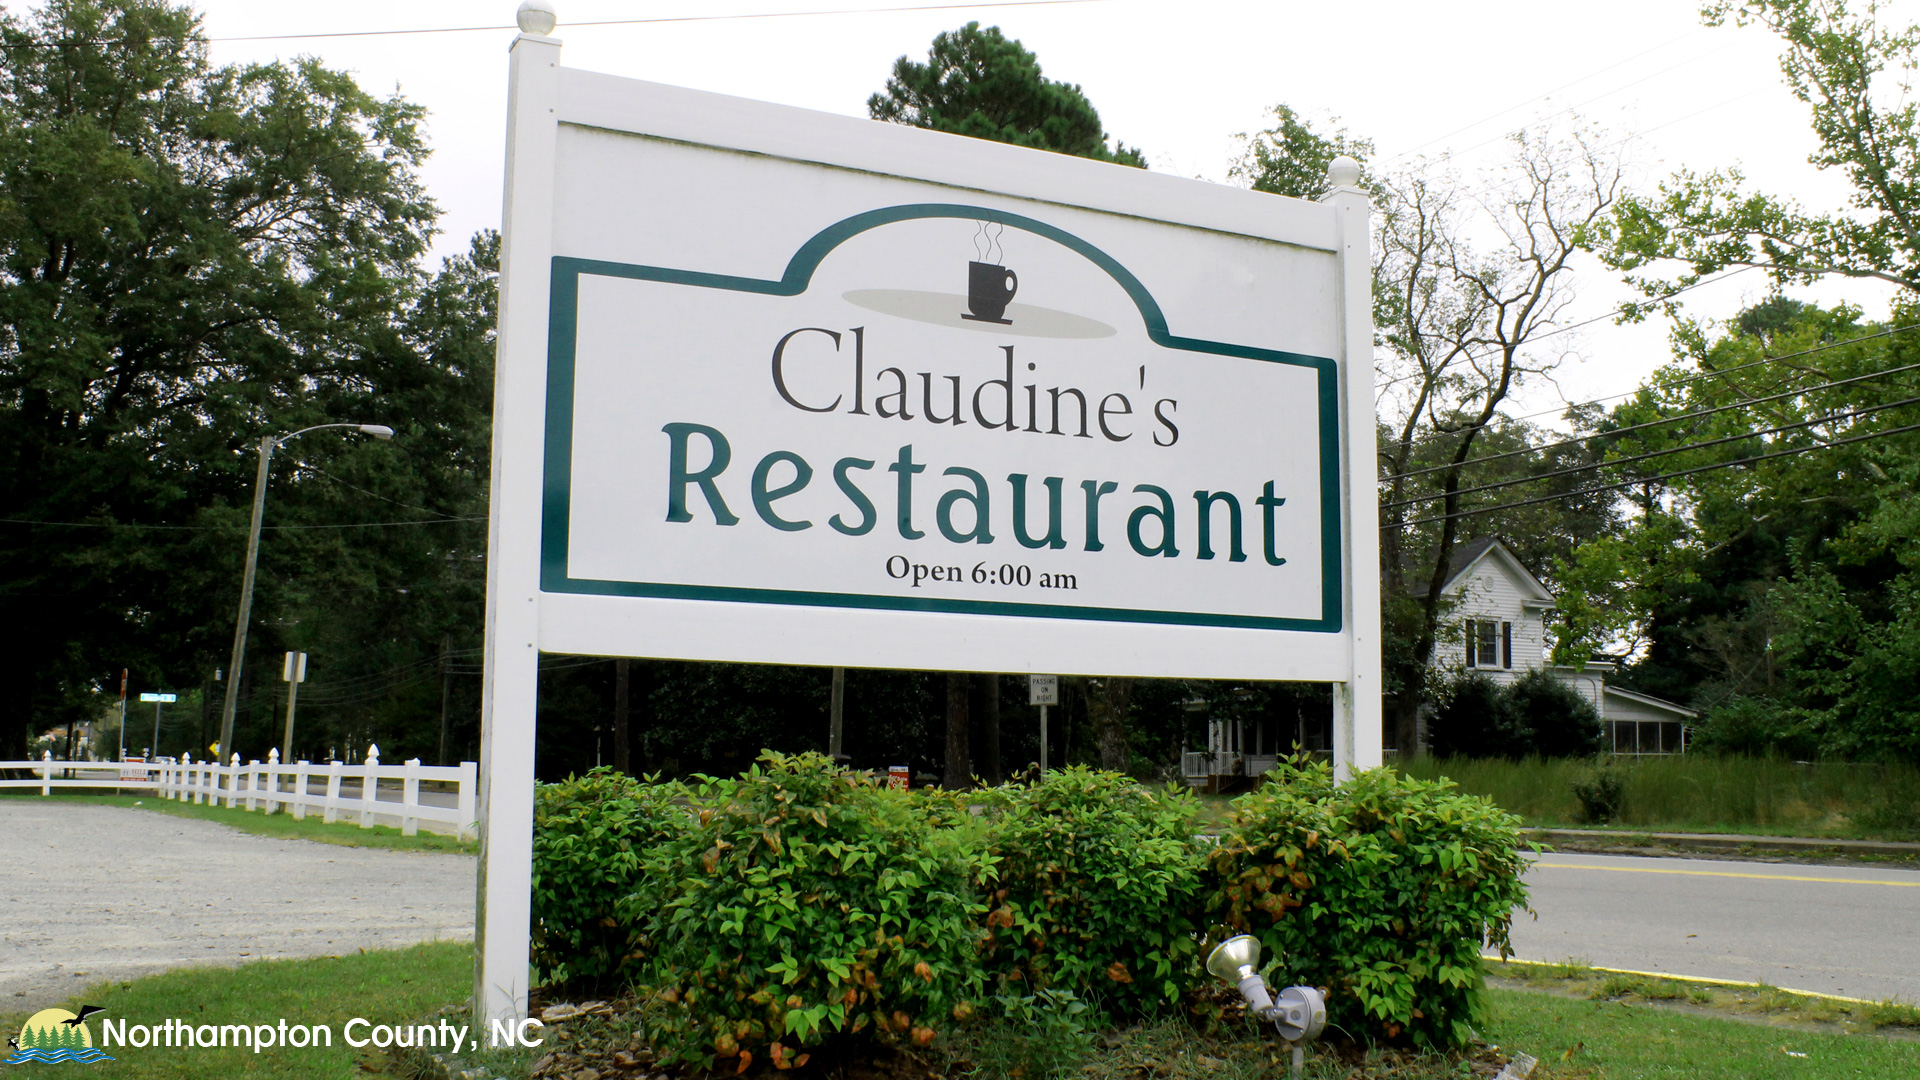 Claudine's Restaurant in Rich Square, NC